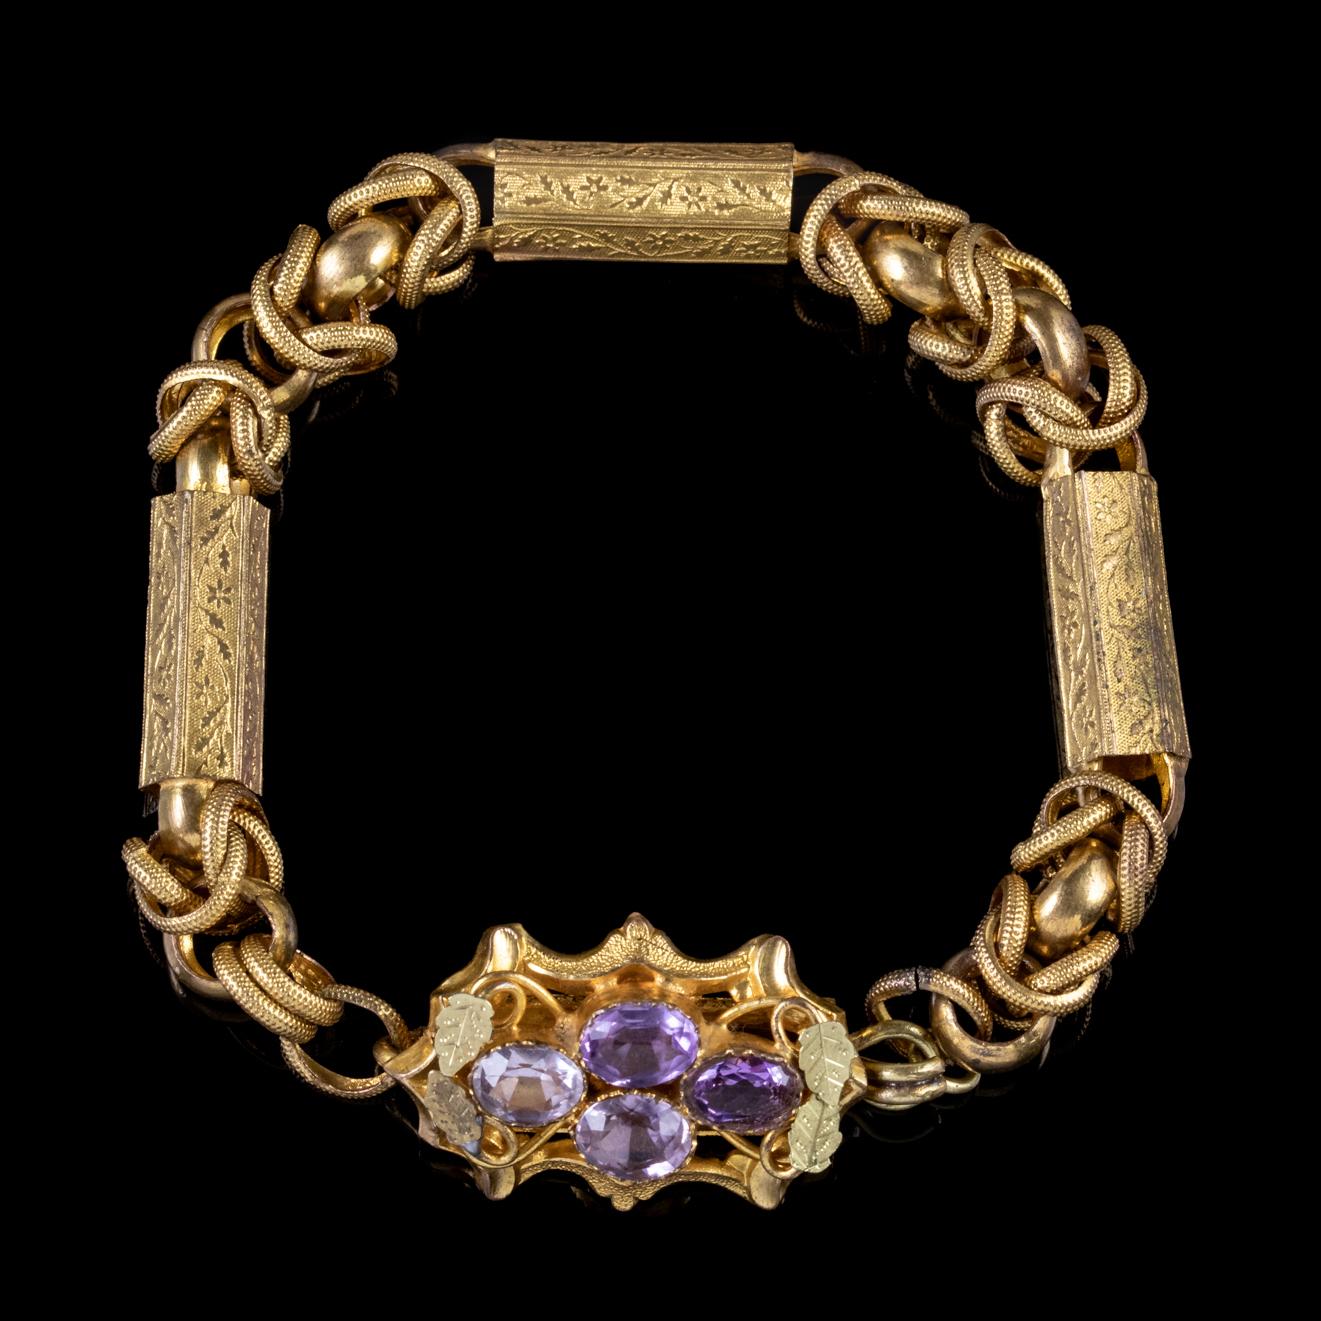 An exquisite antique Georgian bracelet featuring an ornate box clasp decorated with four natural Amethysts, approx. 1.25ct in total among a bed of Golden leaves. 

The bracelet is made up of intertwined pinchbeck links gilded in 18ct Yellow Gold